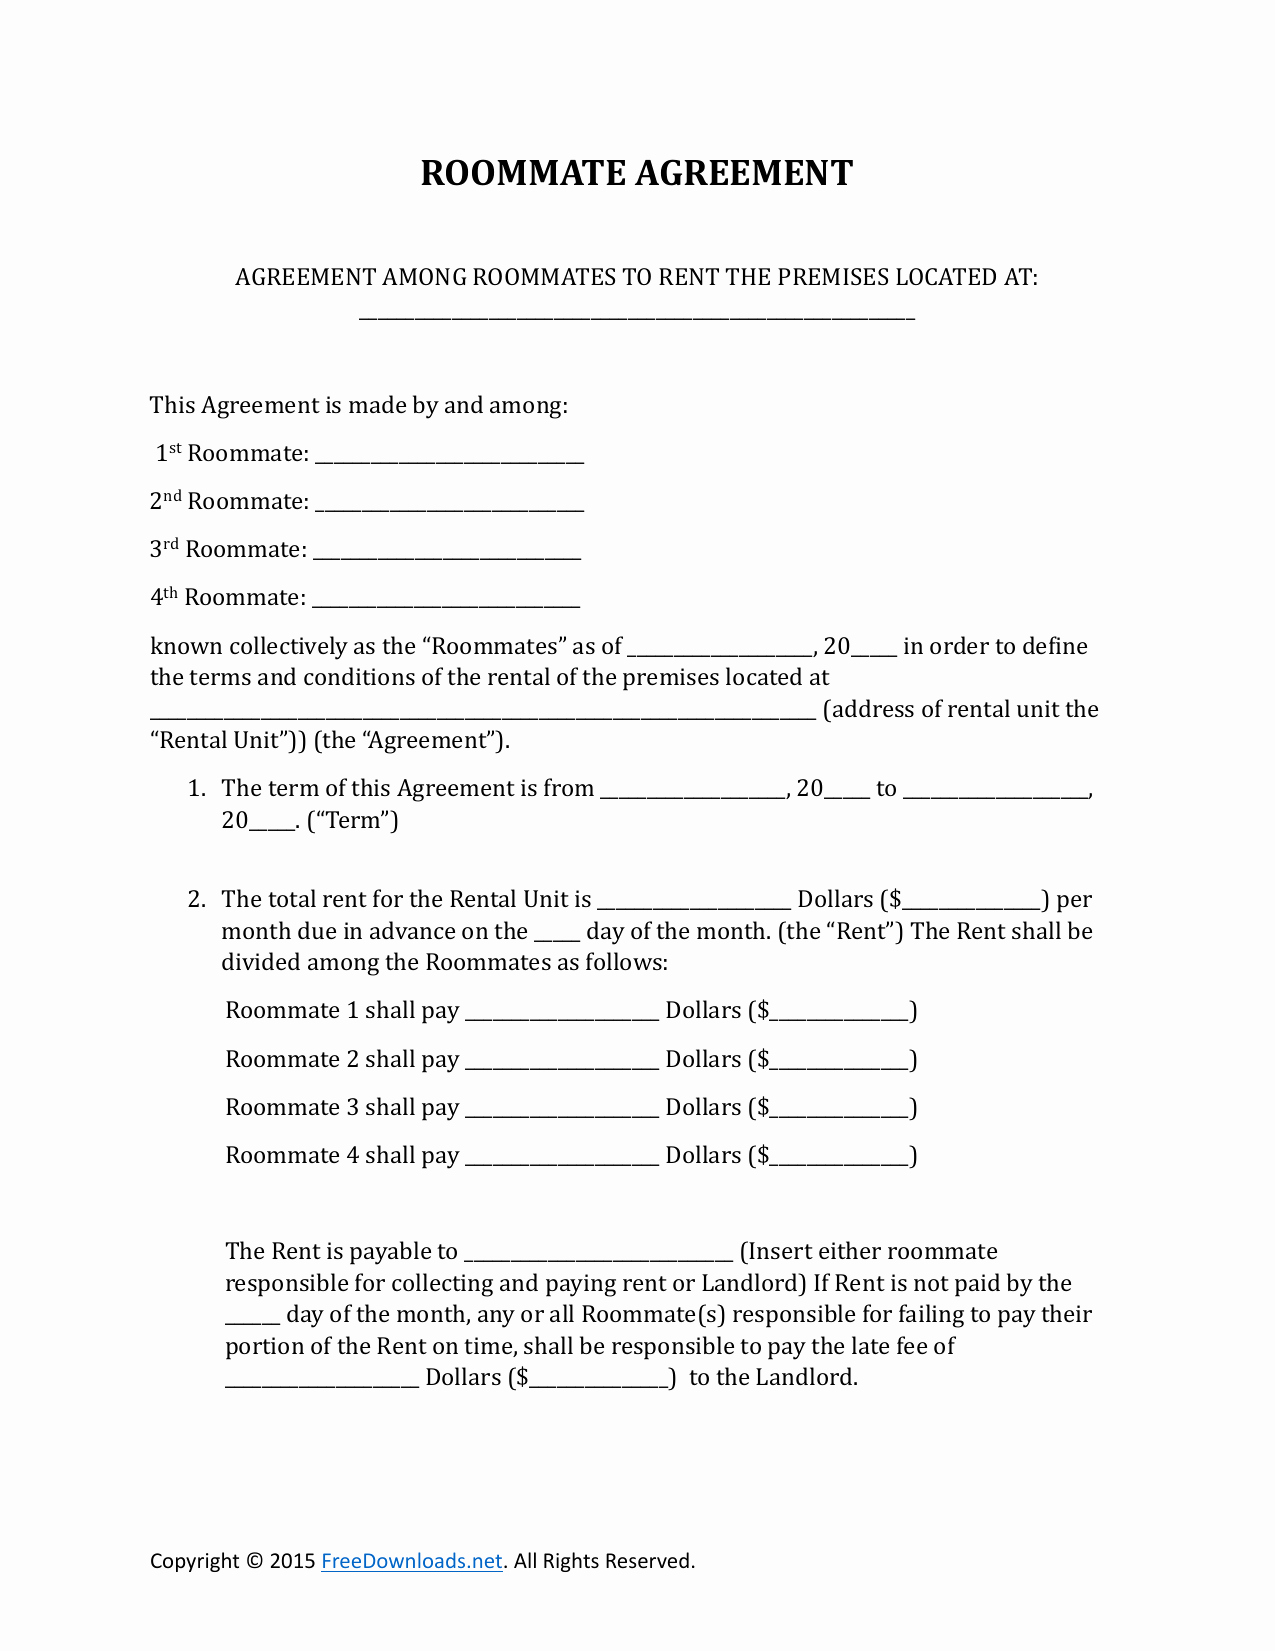 Room Rental Agreement Form Rental Agreement Template Pdf Awesome 10 Sample Rental Lease